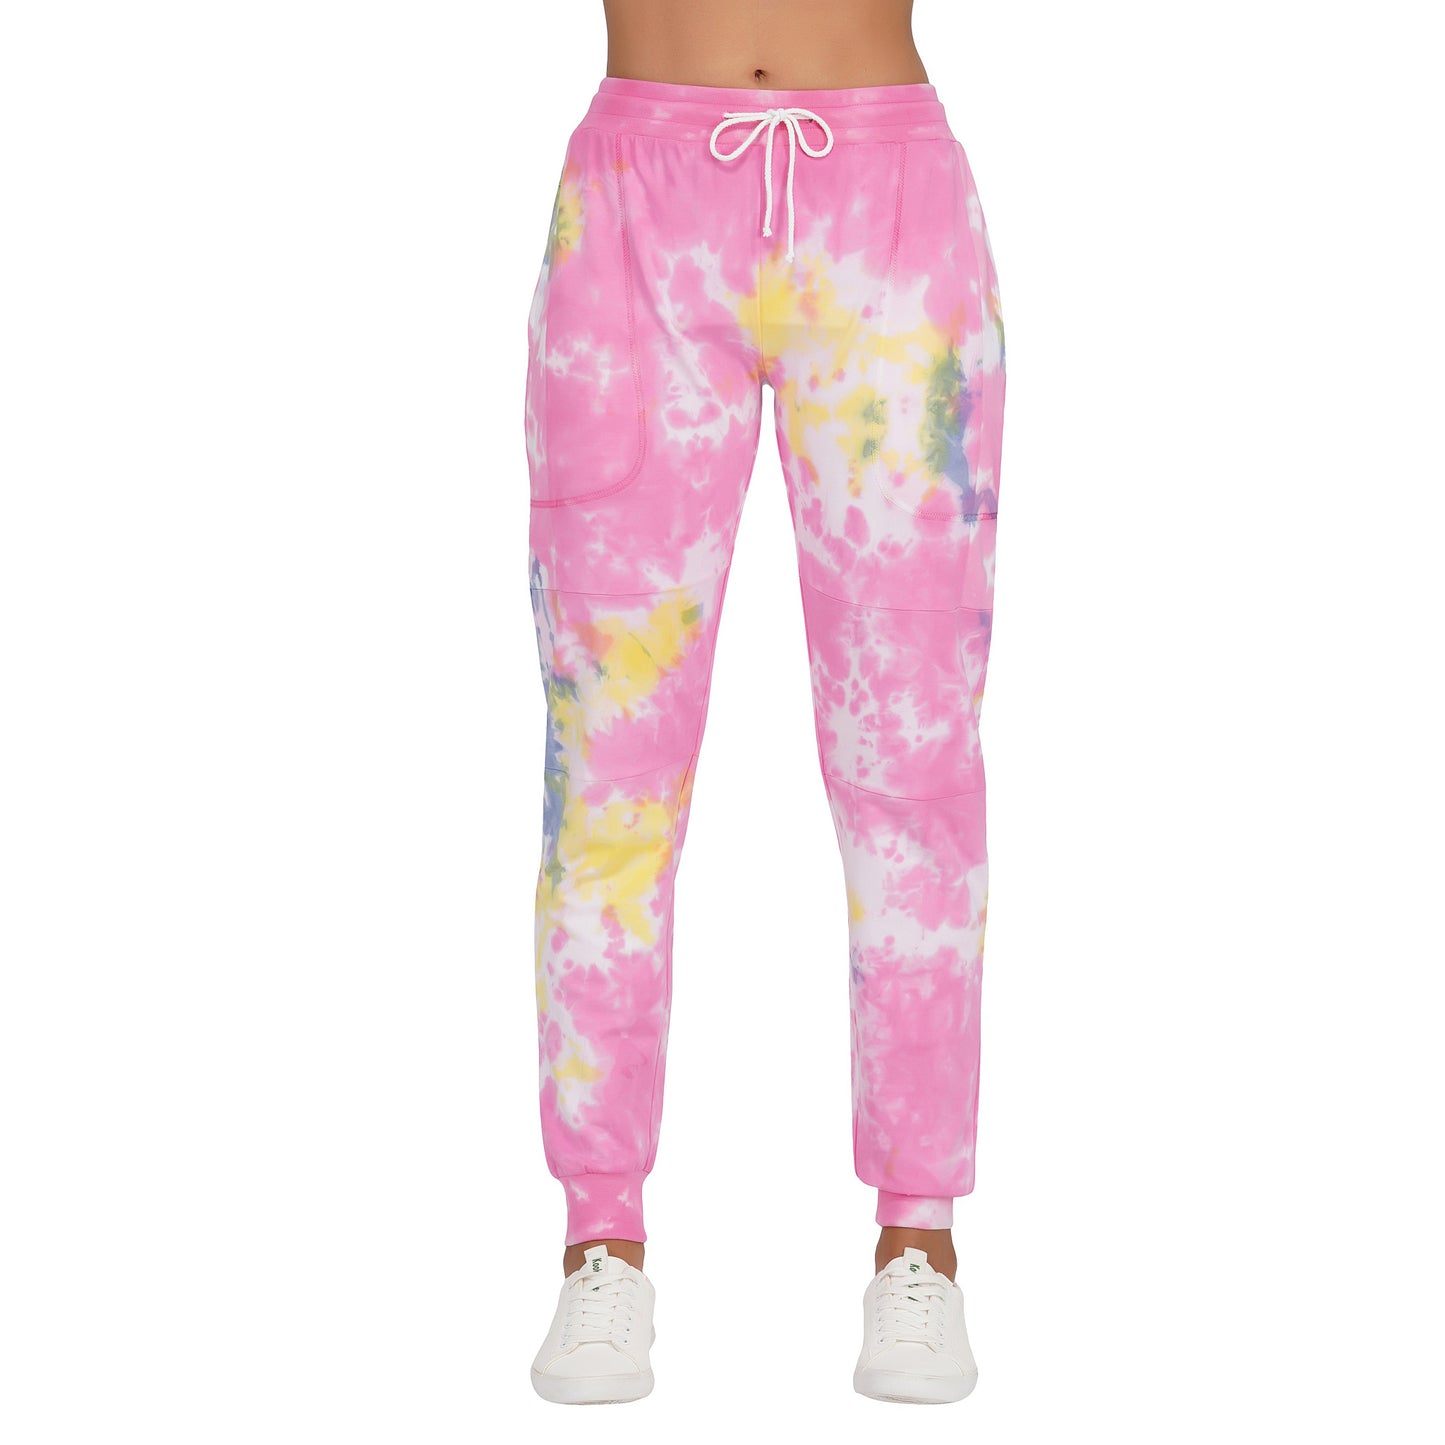 SLAY. Sport Women's Pink Tie Dye Hoodie & Joggers Co ord Set-clothing-to-slay.myshopify.com-Tracksuit